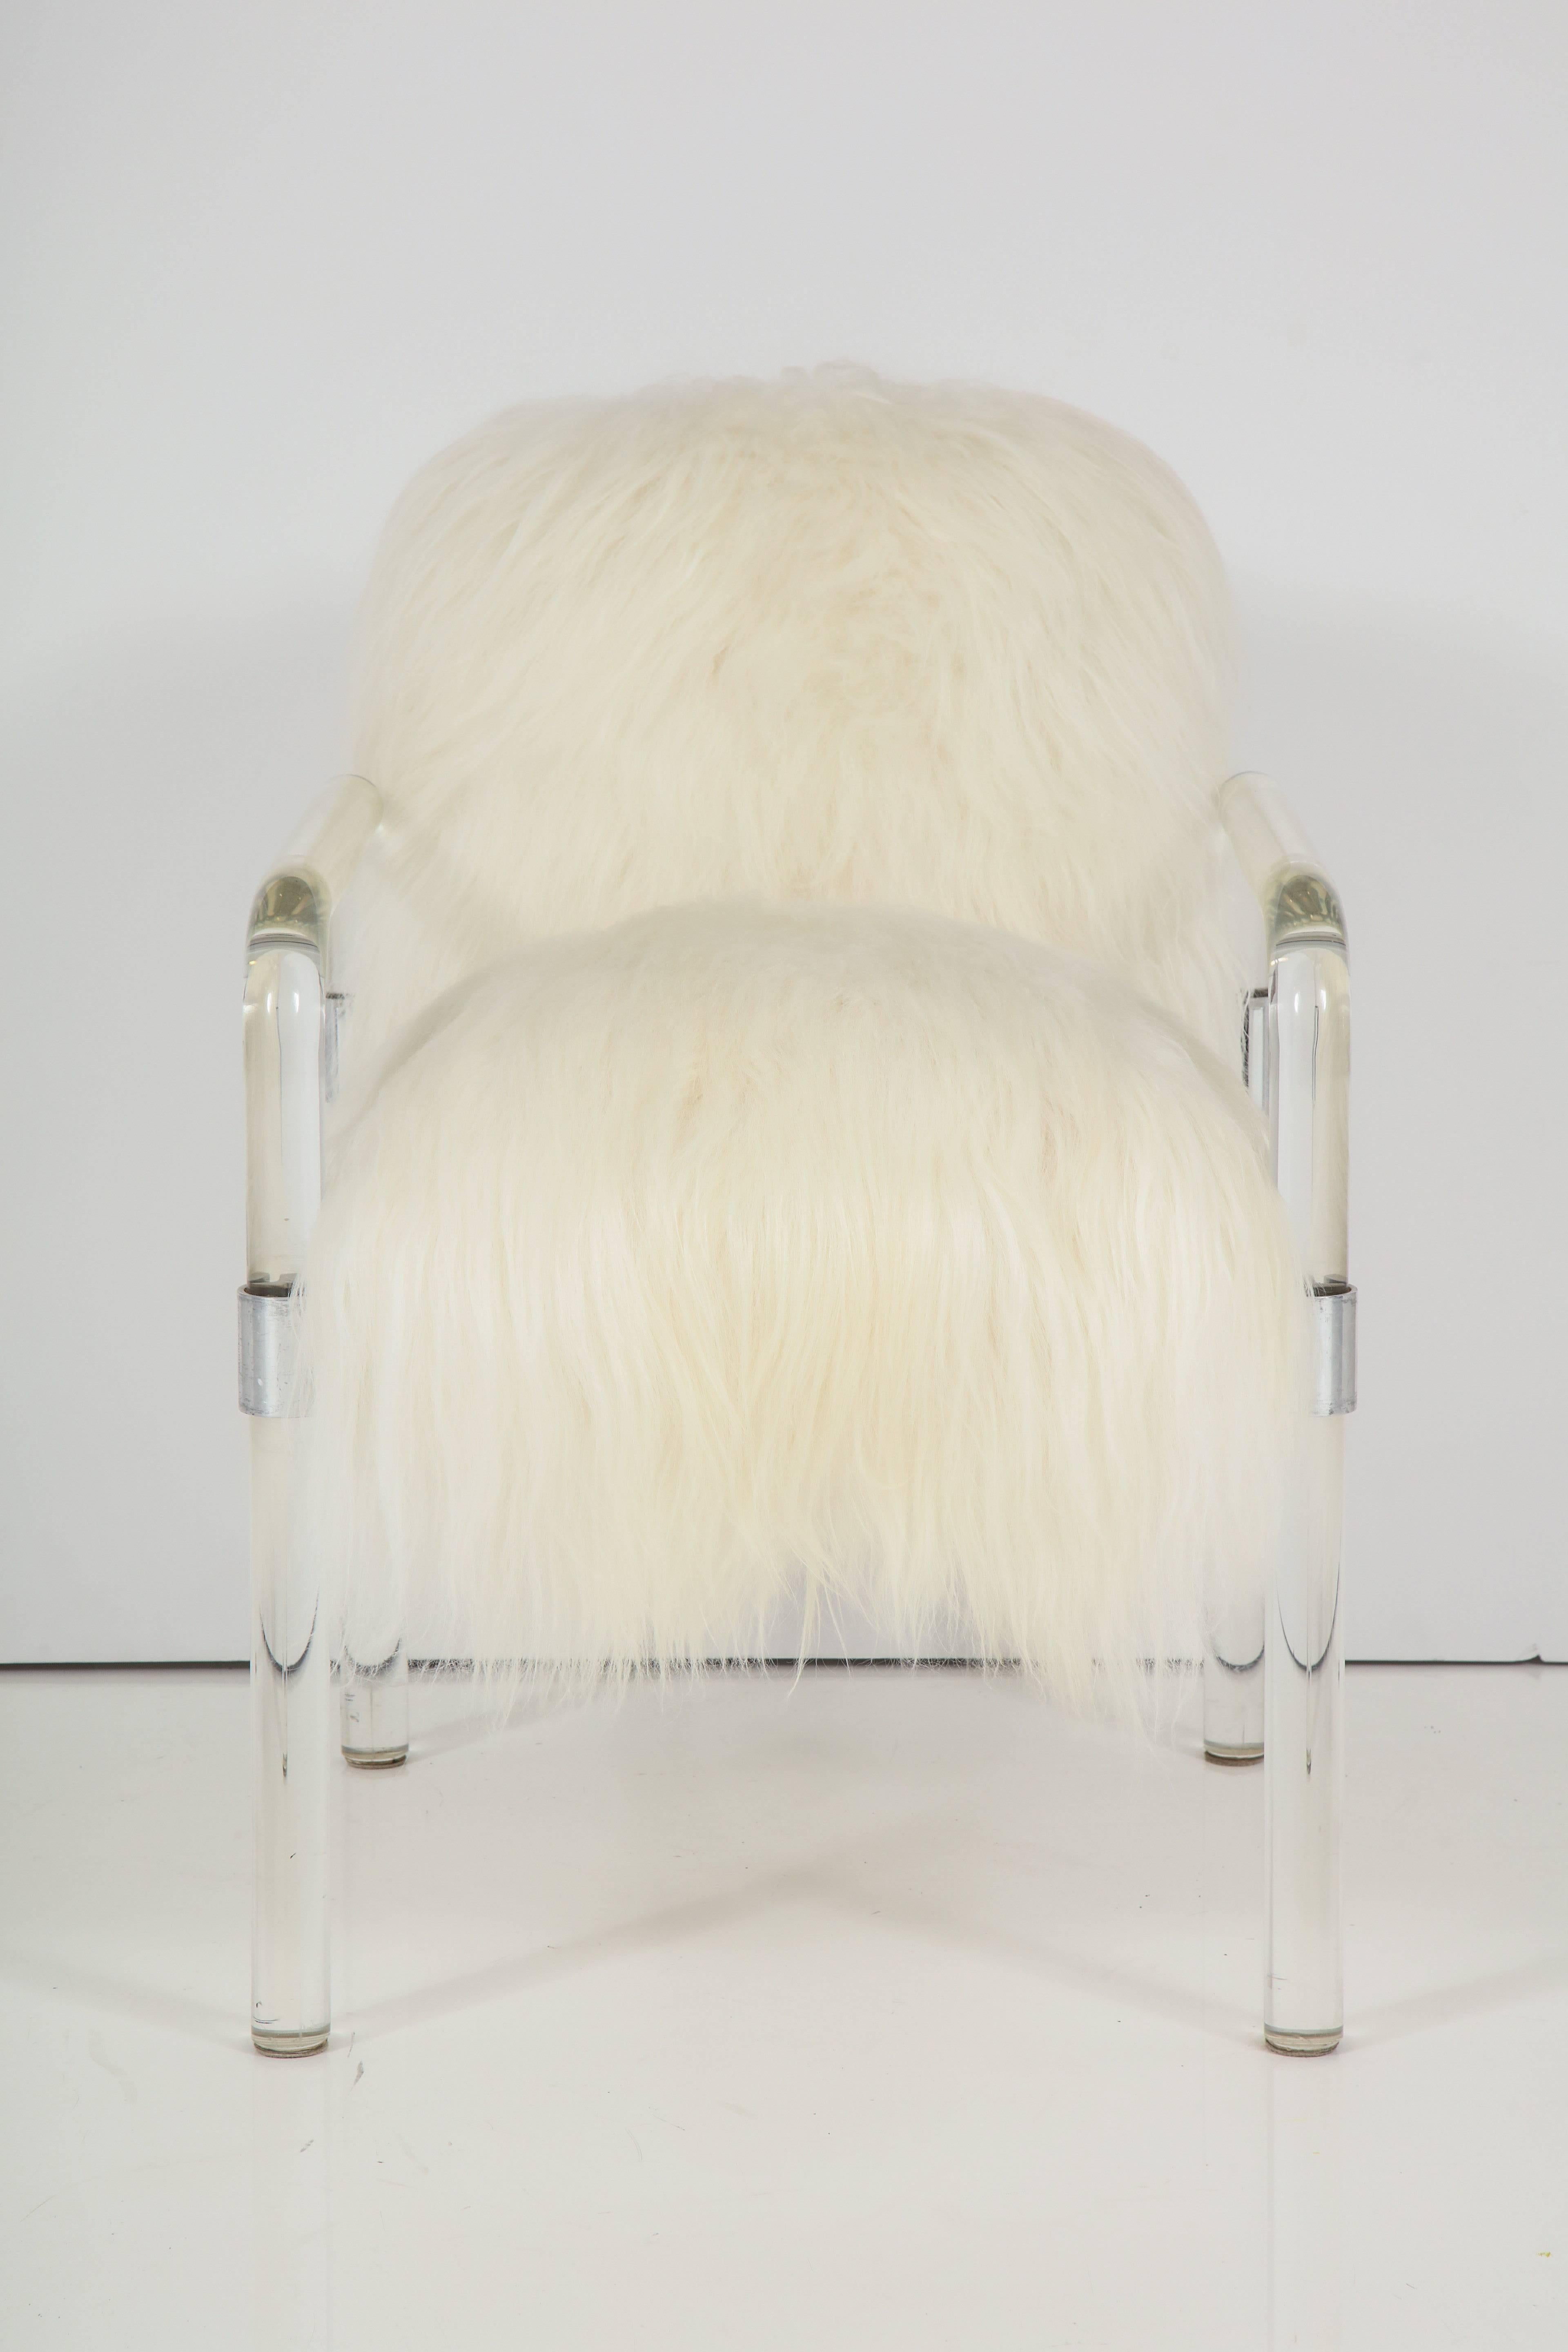 Pair of Pipeline series Lucite arm chairs designed by Jeff Messerschmidt in luxurious pure white long hair Arctic sheepskin. Upholstery is dense and extremely soft. Currently there is a pair available, $3400 each.